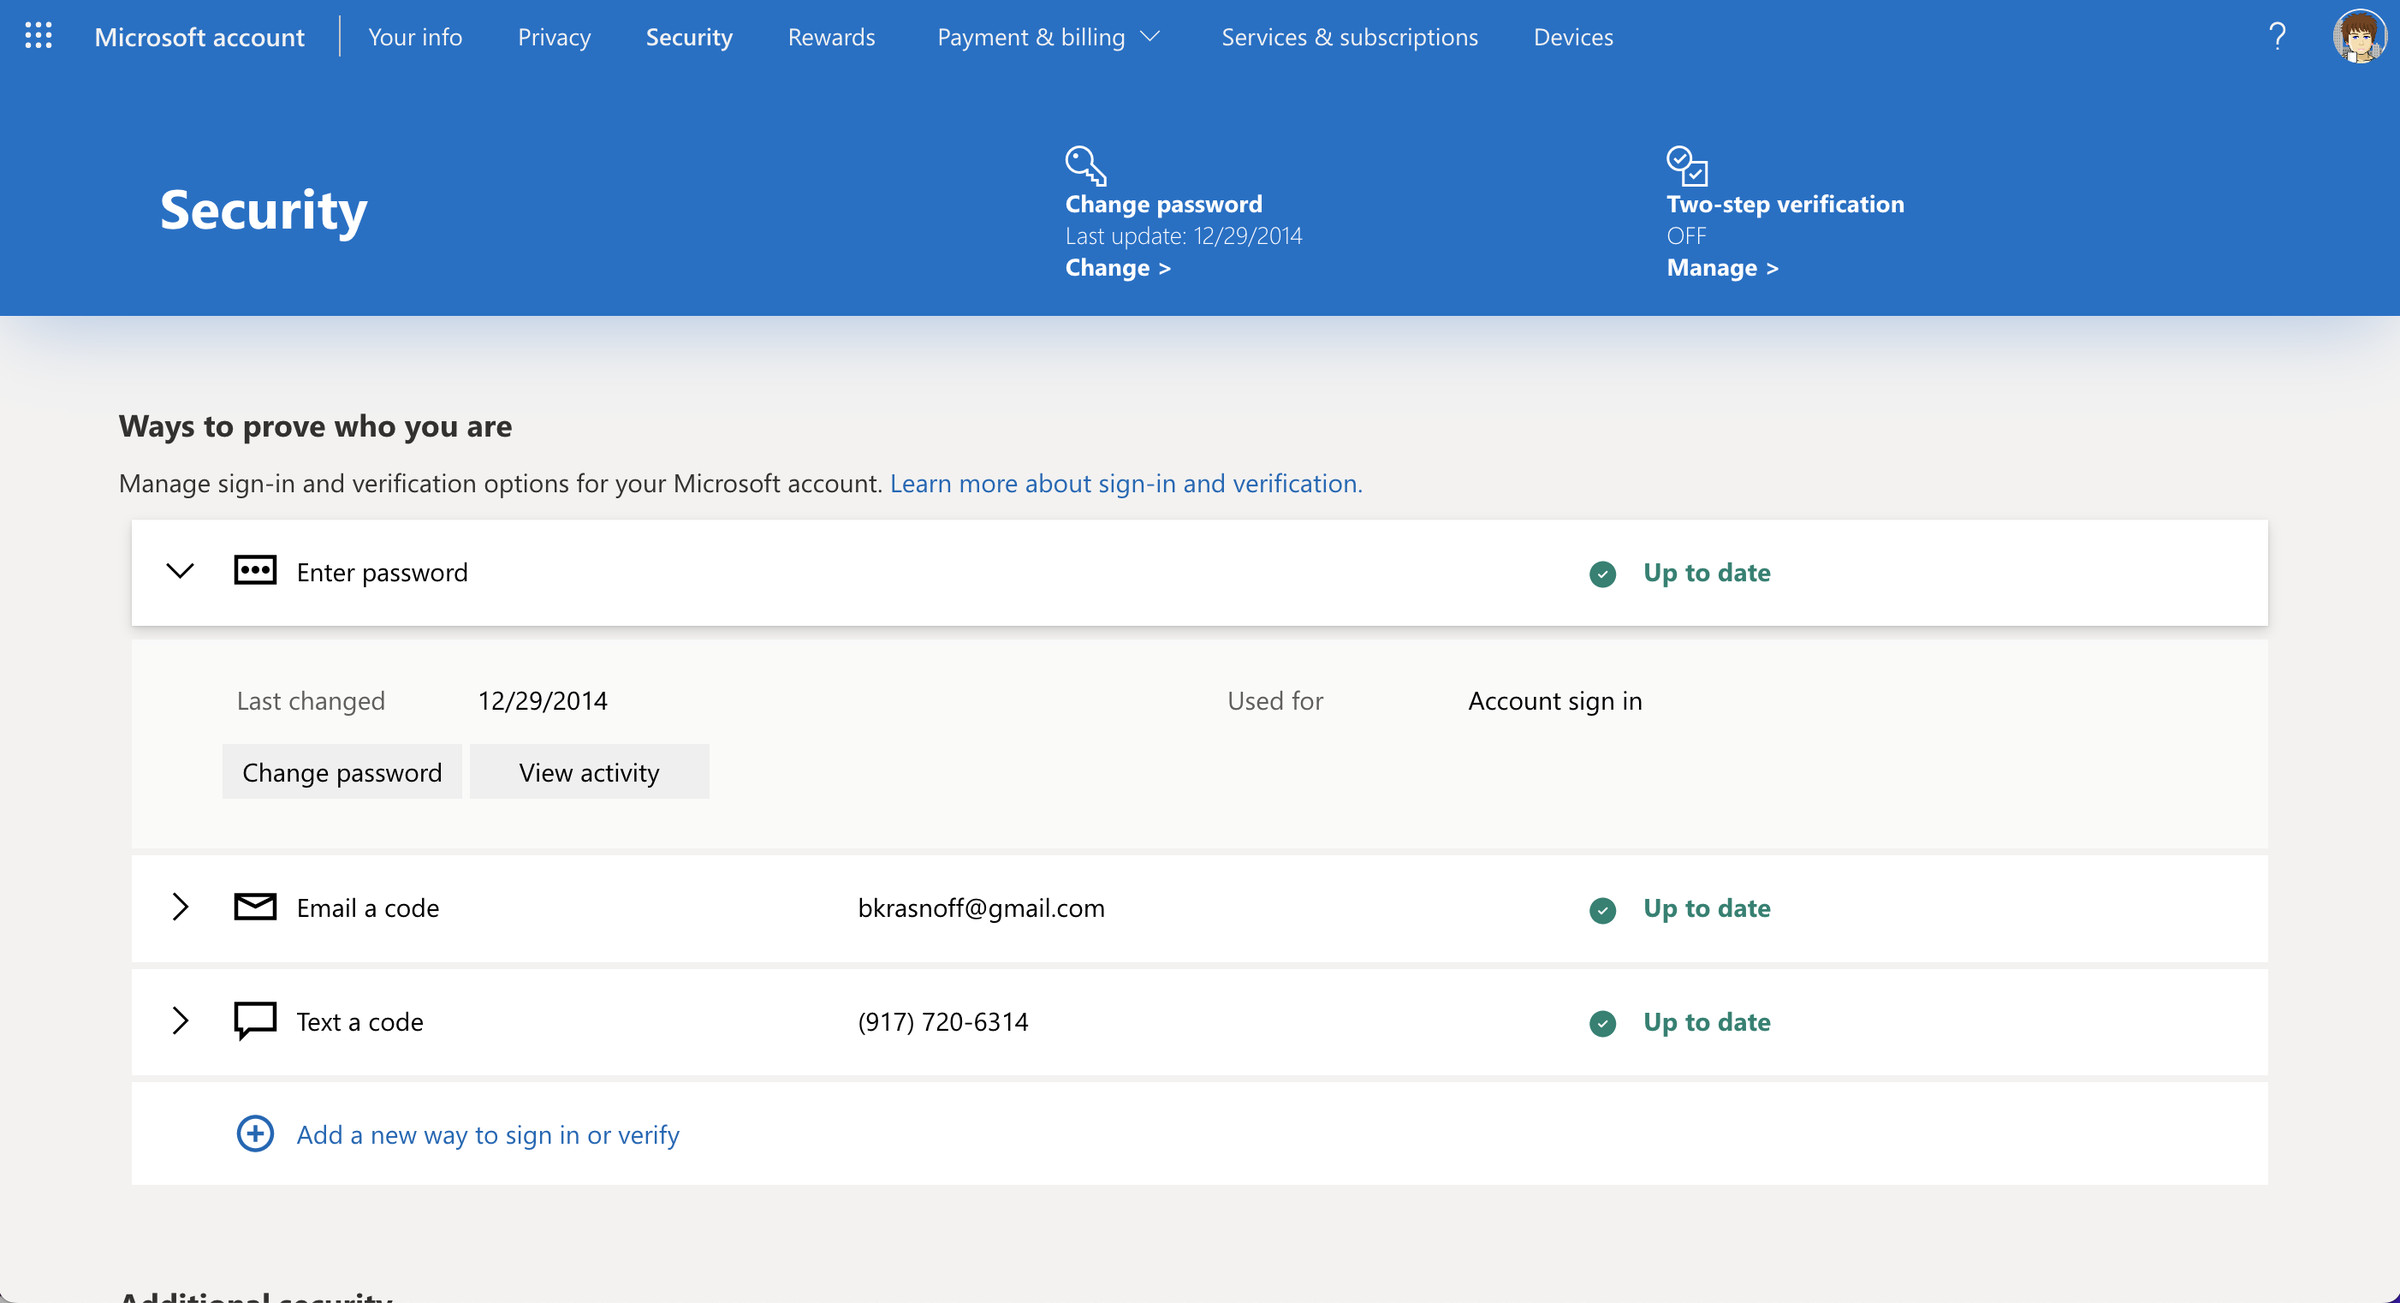 Microsoft page with Security on top right of blue header background, Change password and Two-step verification to the right of that. Below the header, under Ways to prove who you are, several security tactics.